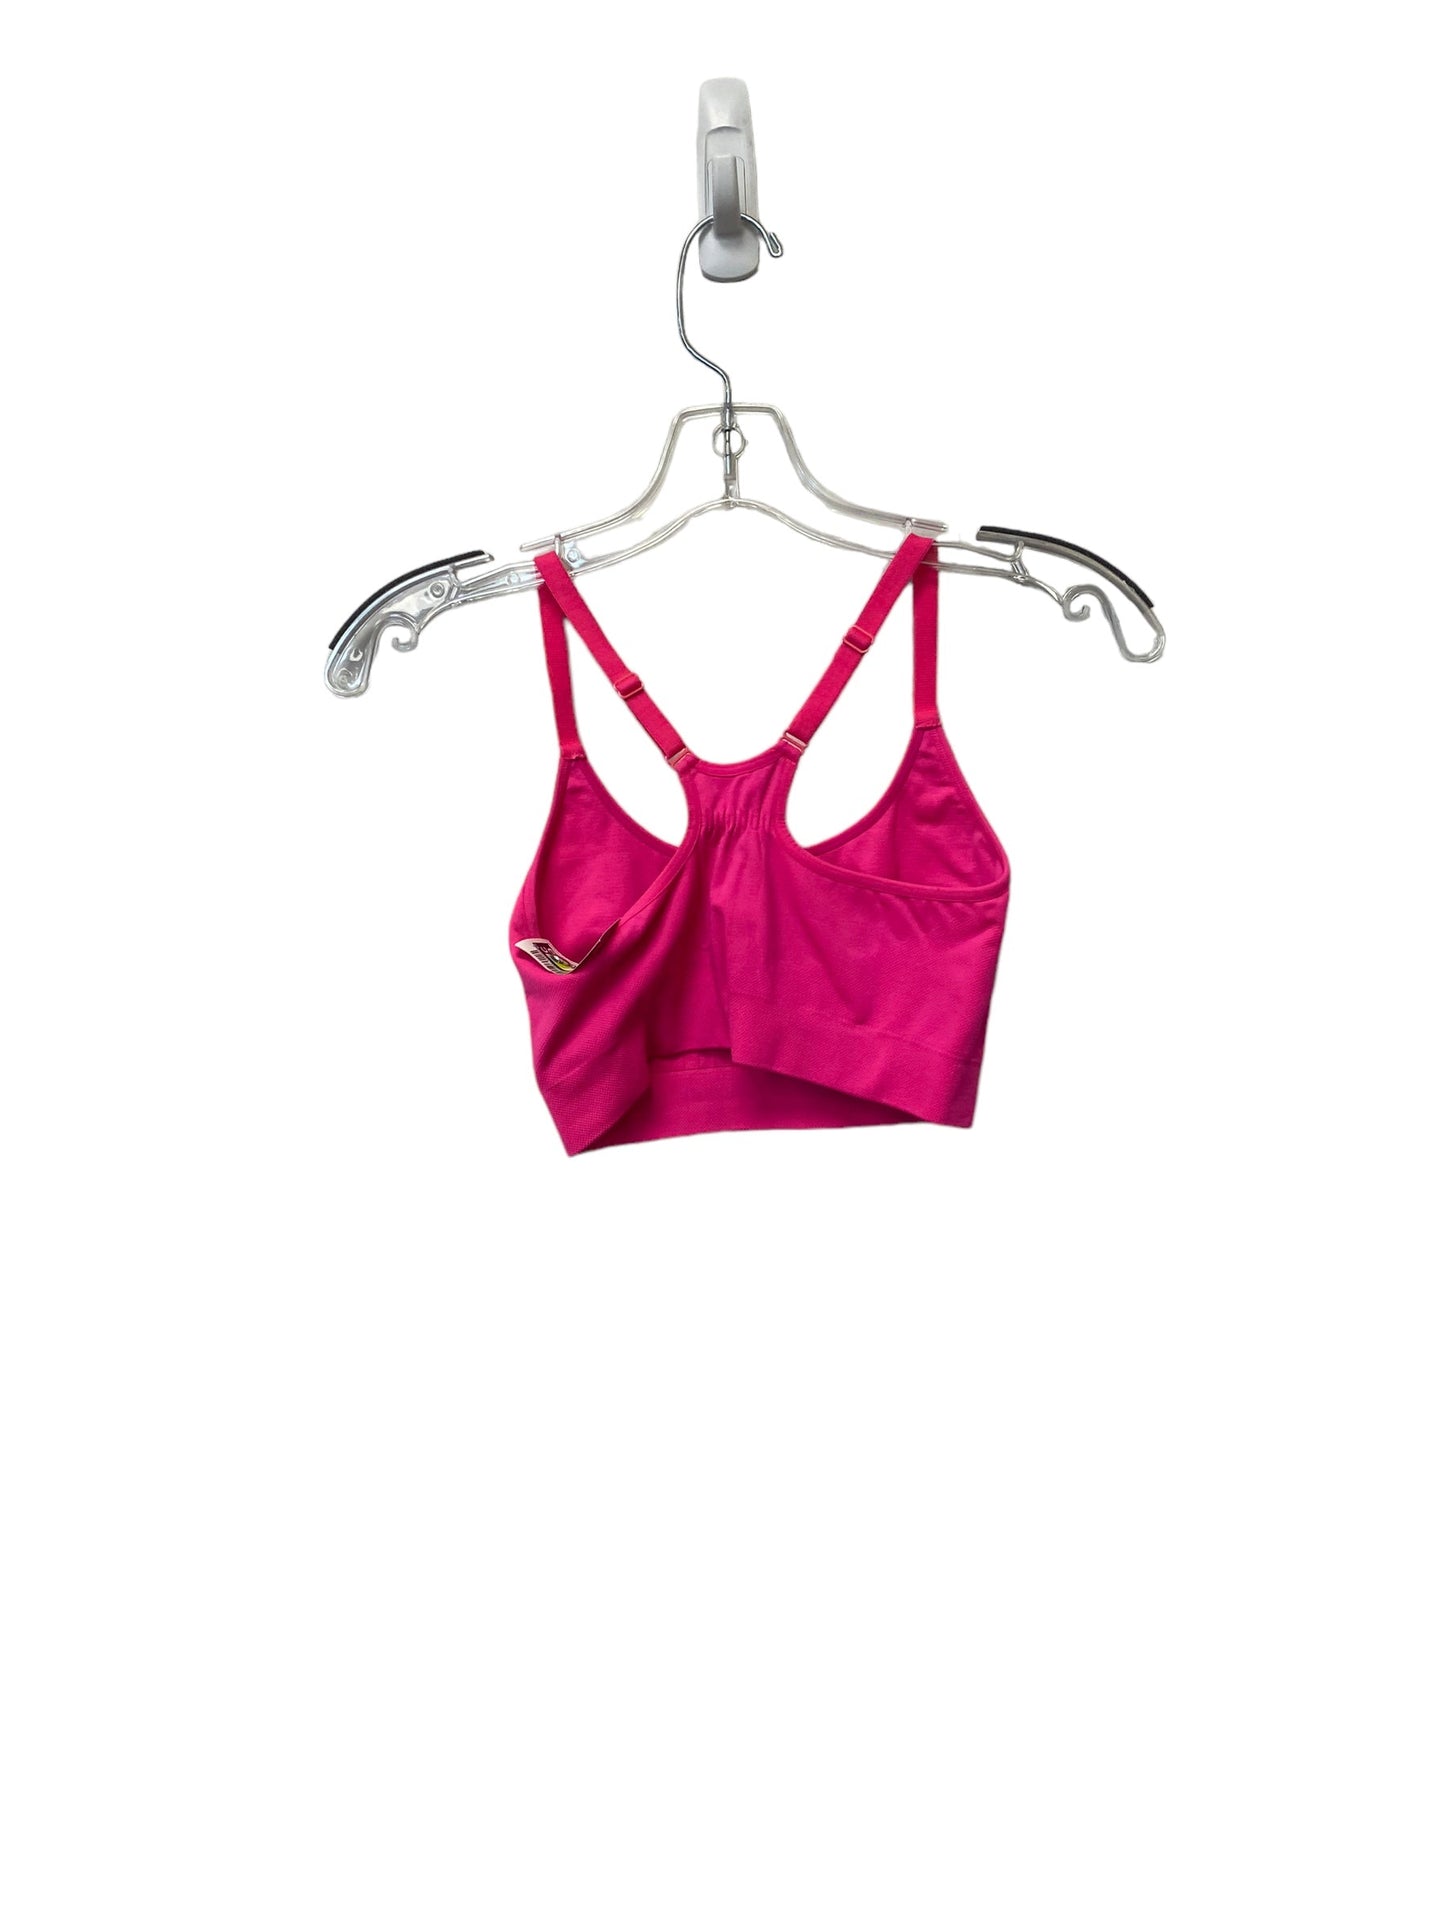 Athletic Bra By Under Armour  Size: M